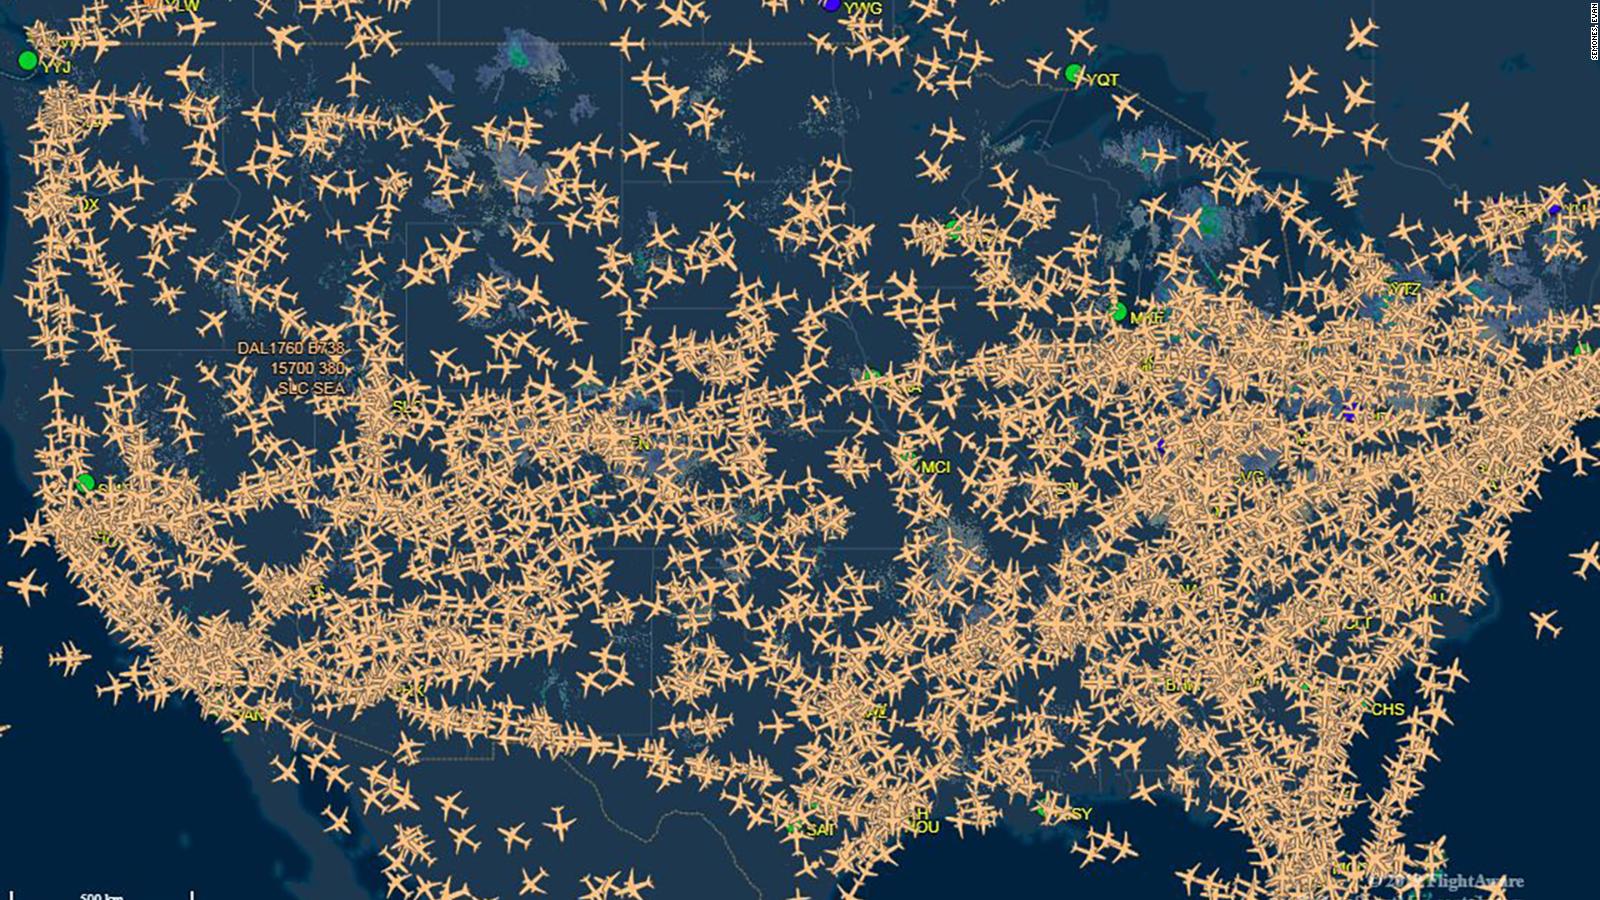 The government shutdown ended after only 10 air traffic controllers